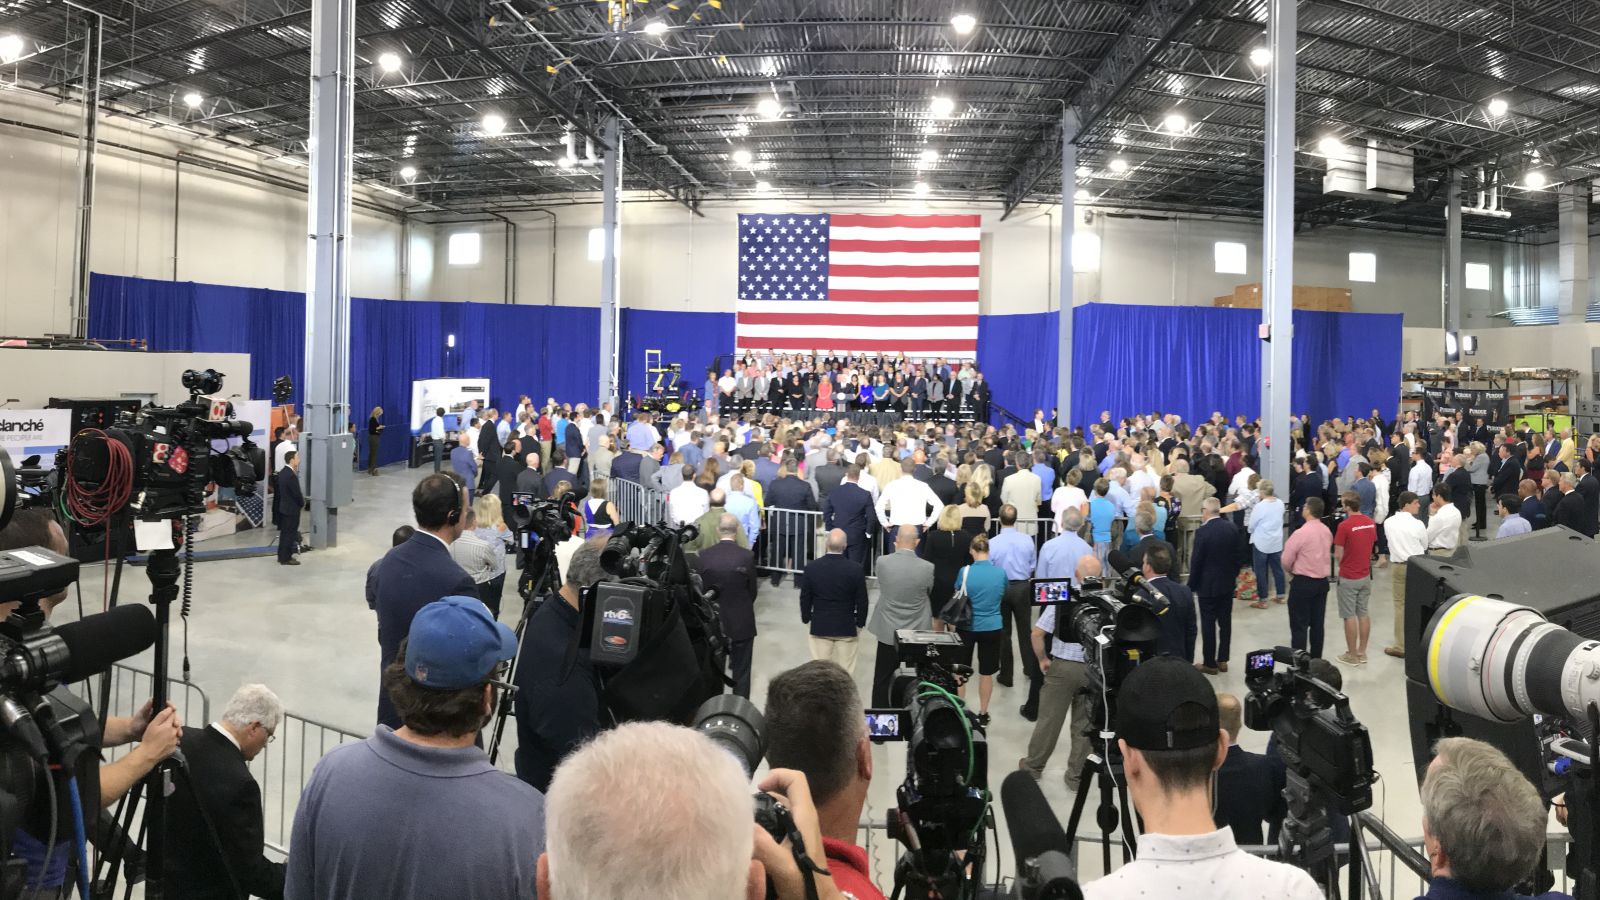 Vice President Mike Pence delivers a policy speech in Purdue Polytechnic Anderson's facility